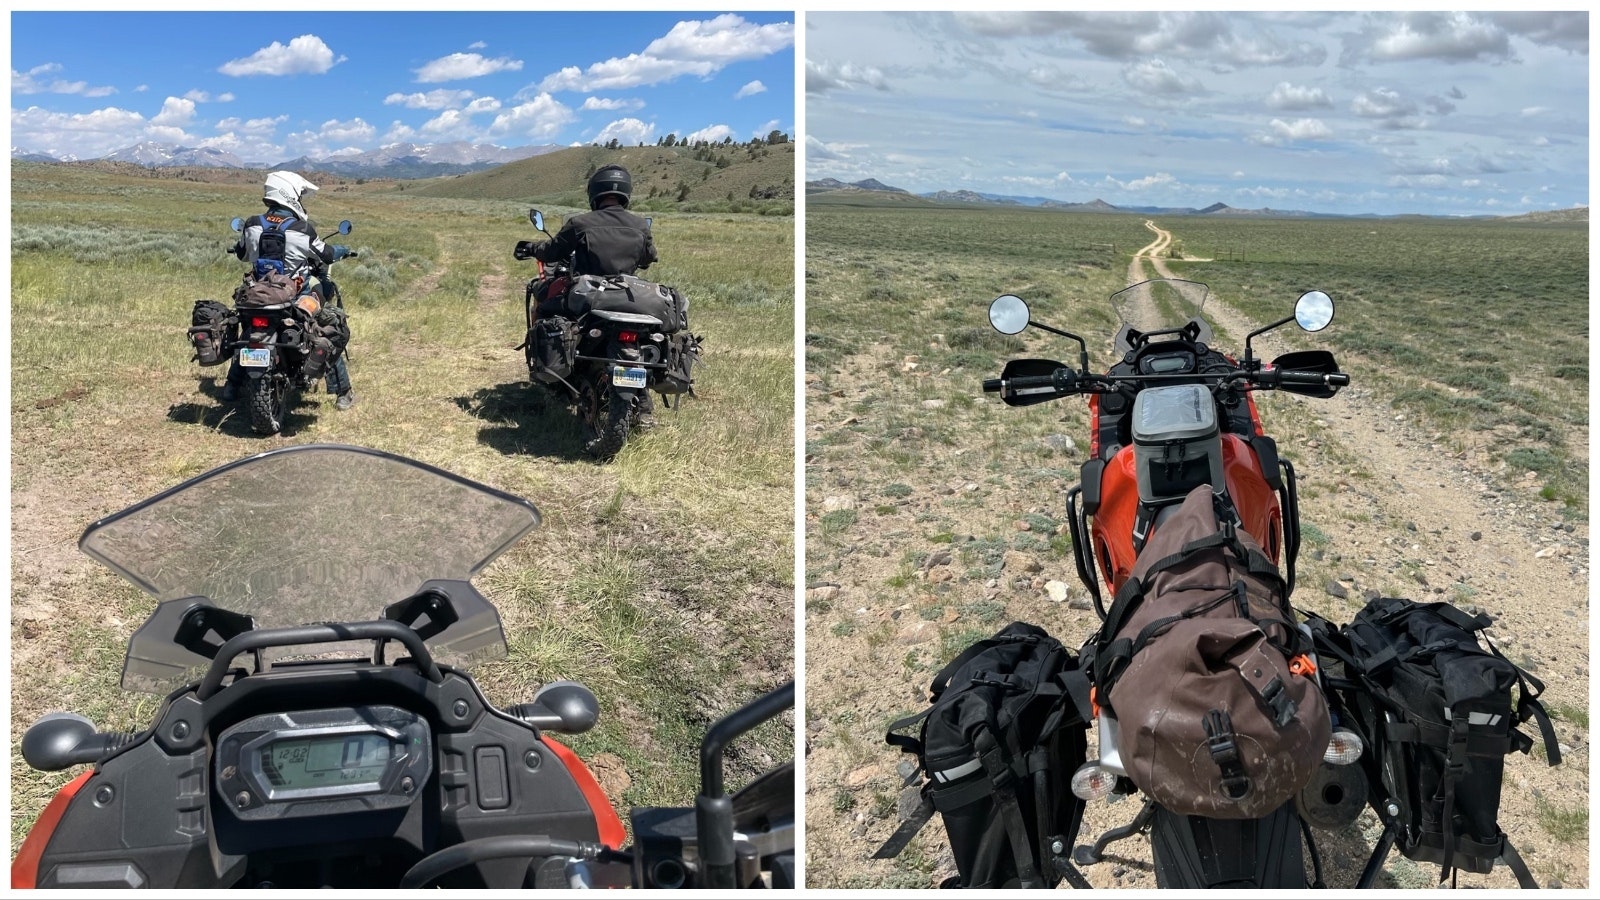 Riders on the Wyoming Backcountry Discovery Route, left, and a fully equipped Kawasaki KLR on the Wyoming Backcountry Discovery Route, right.